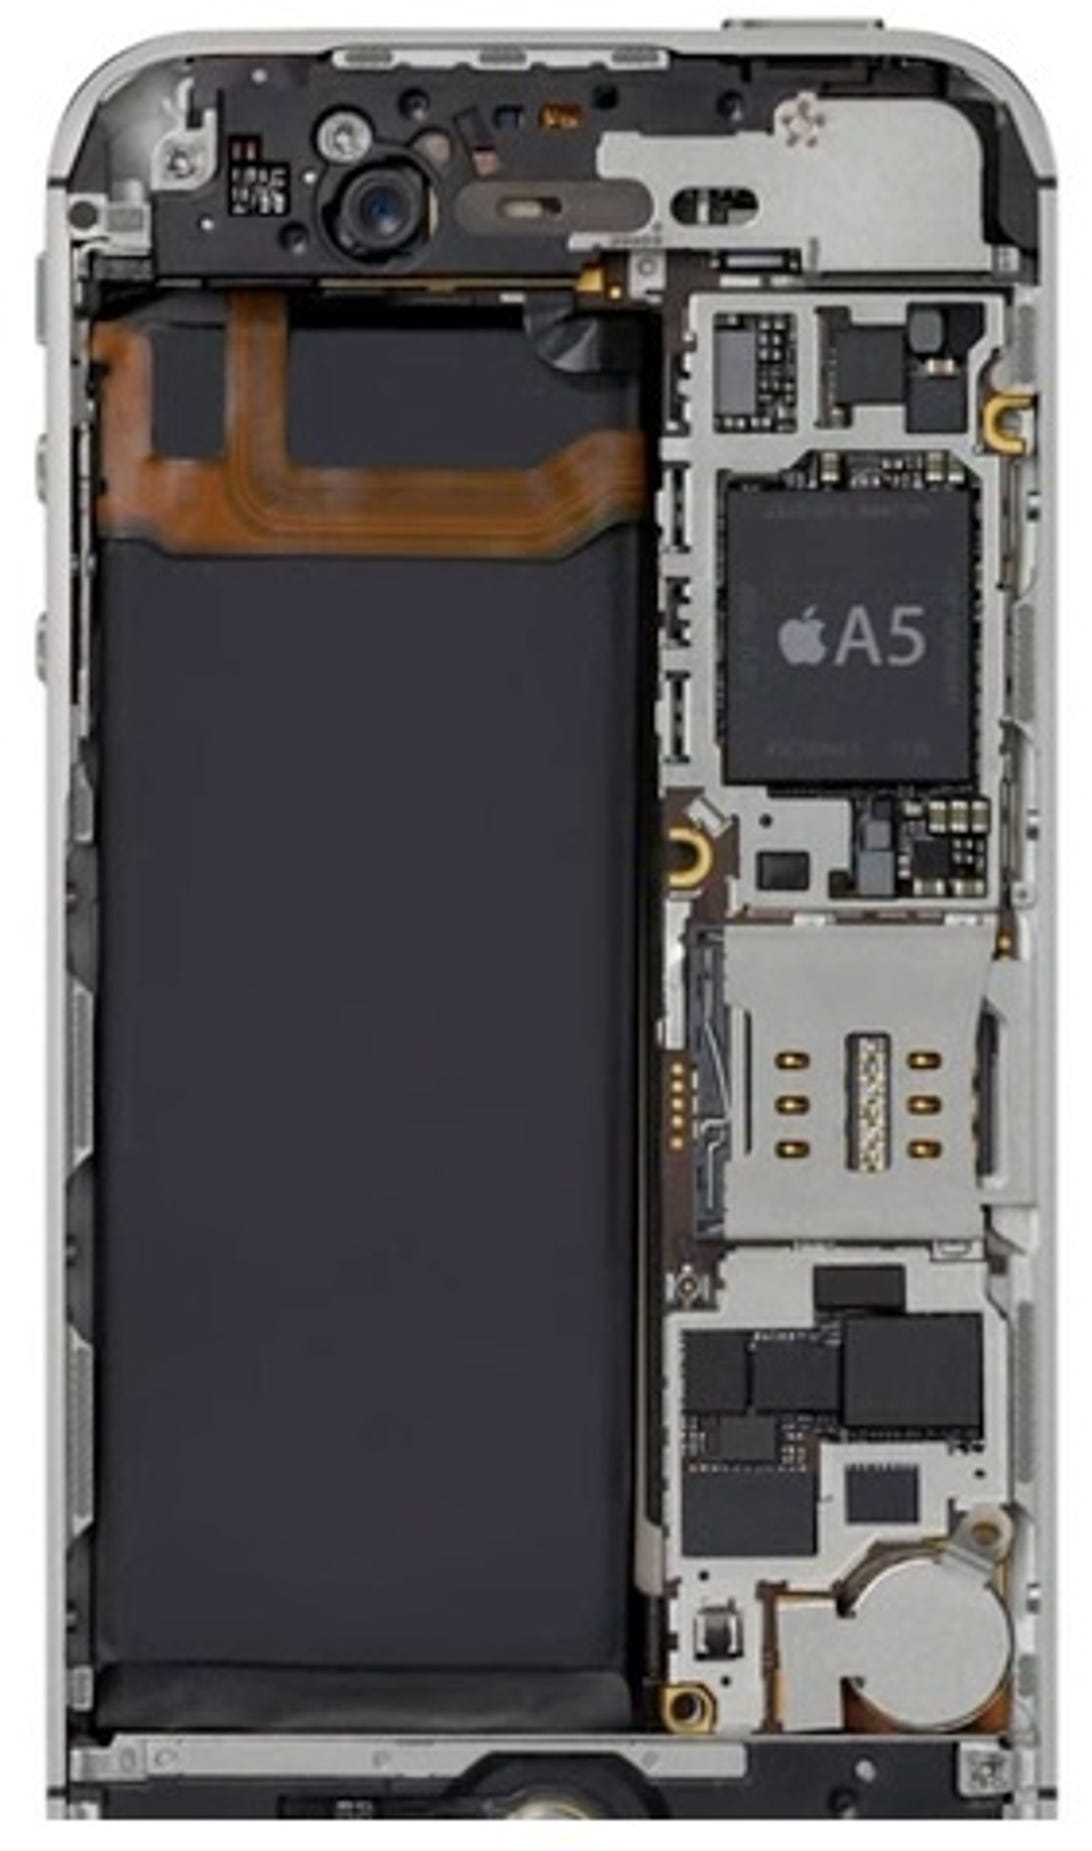 The first iPhone with a dual-core chip--the same A5 chip that is in the iPad 2.